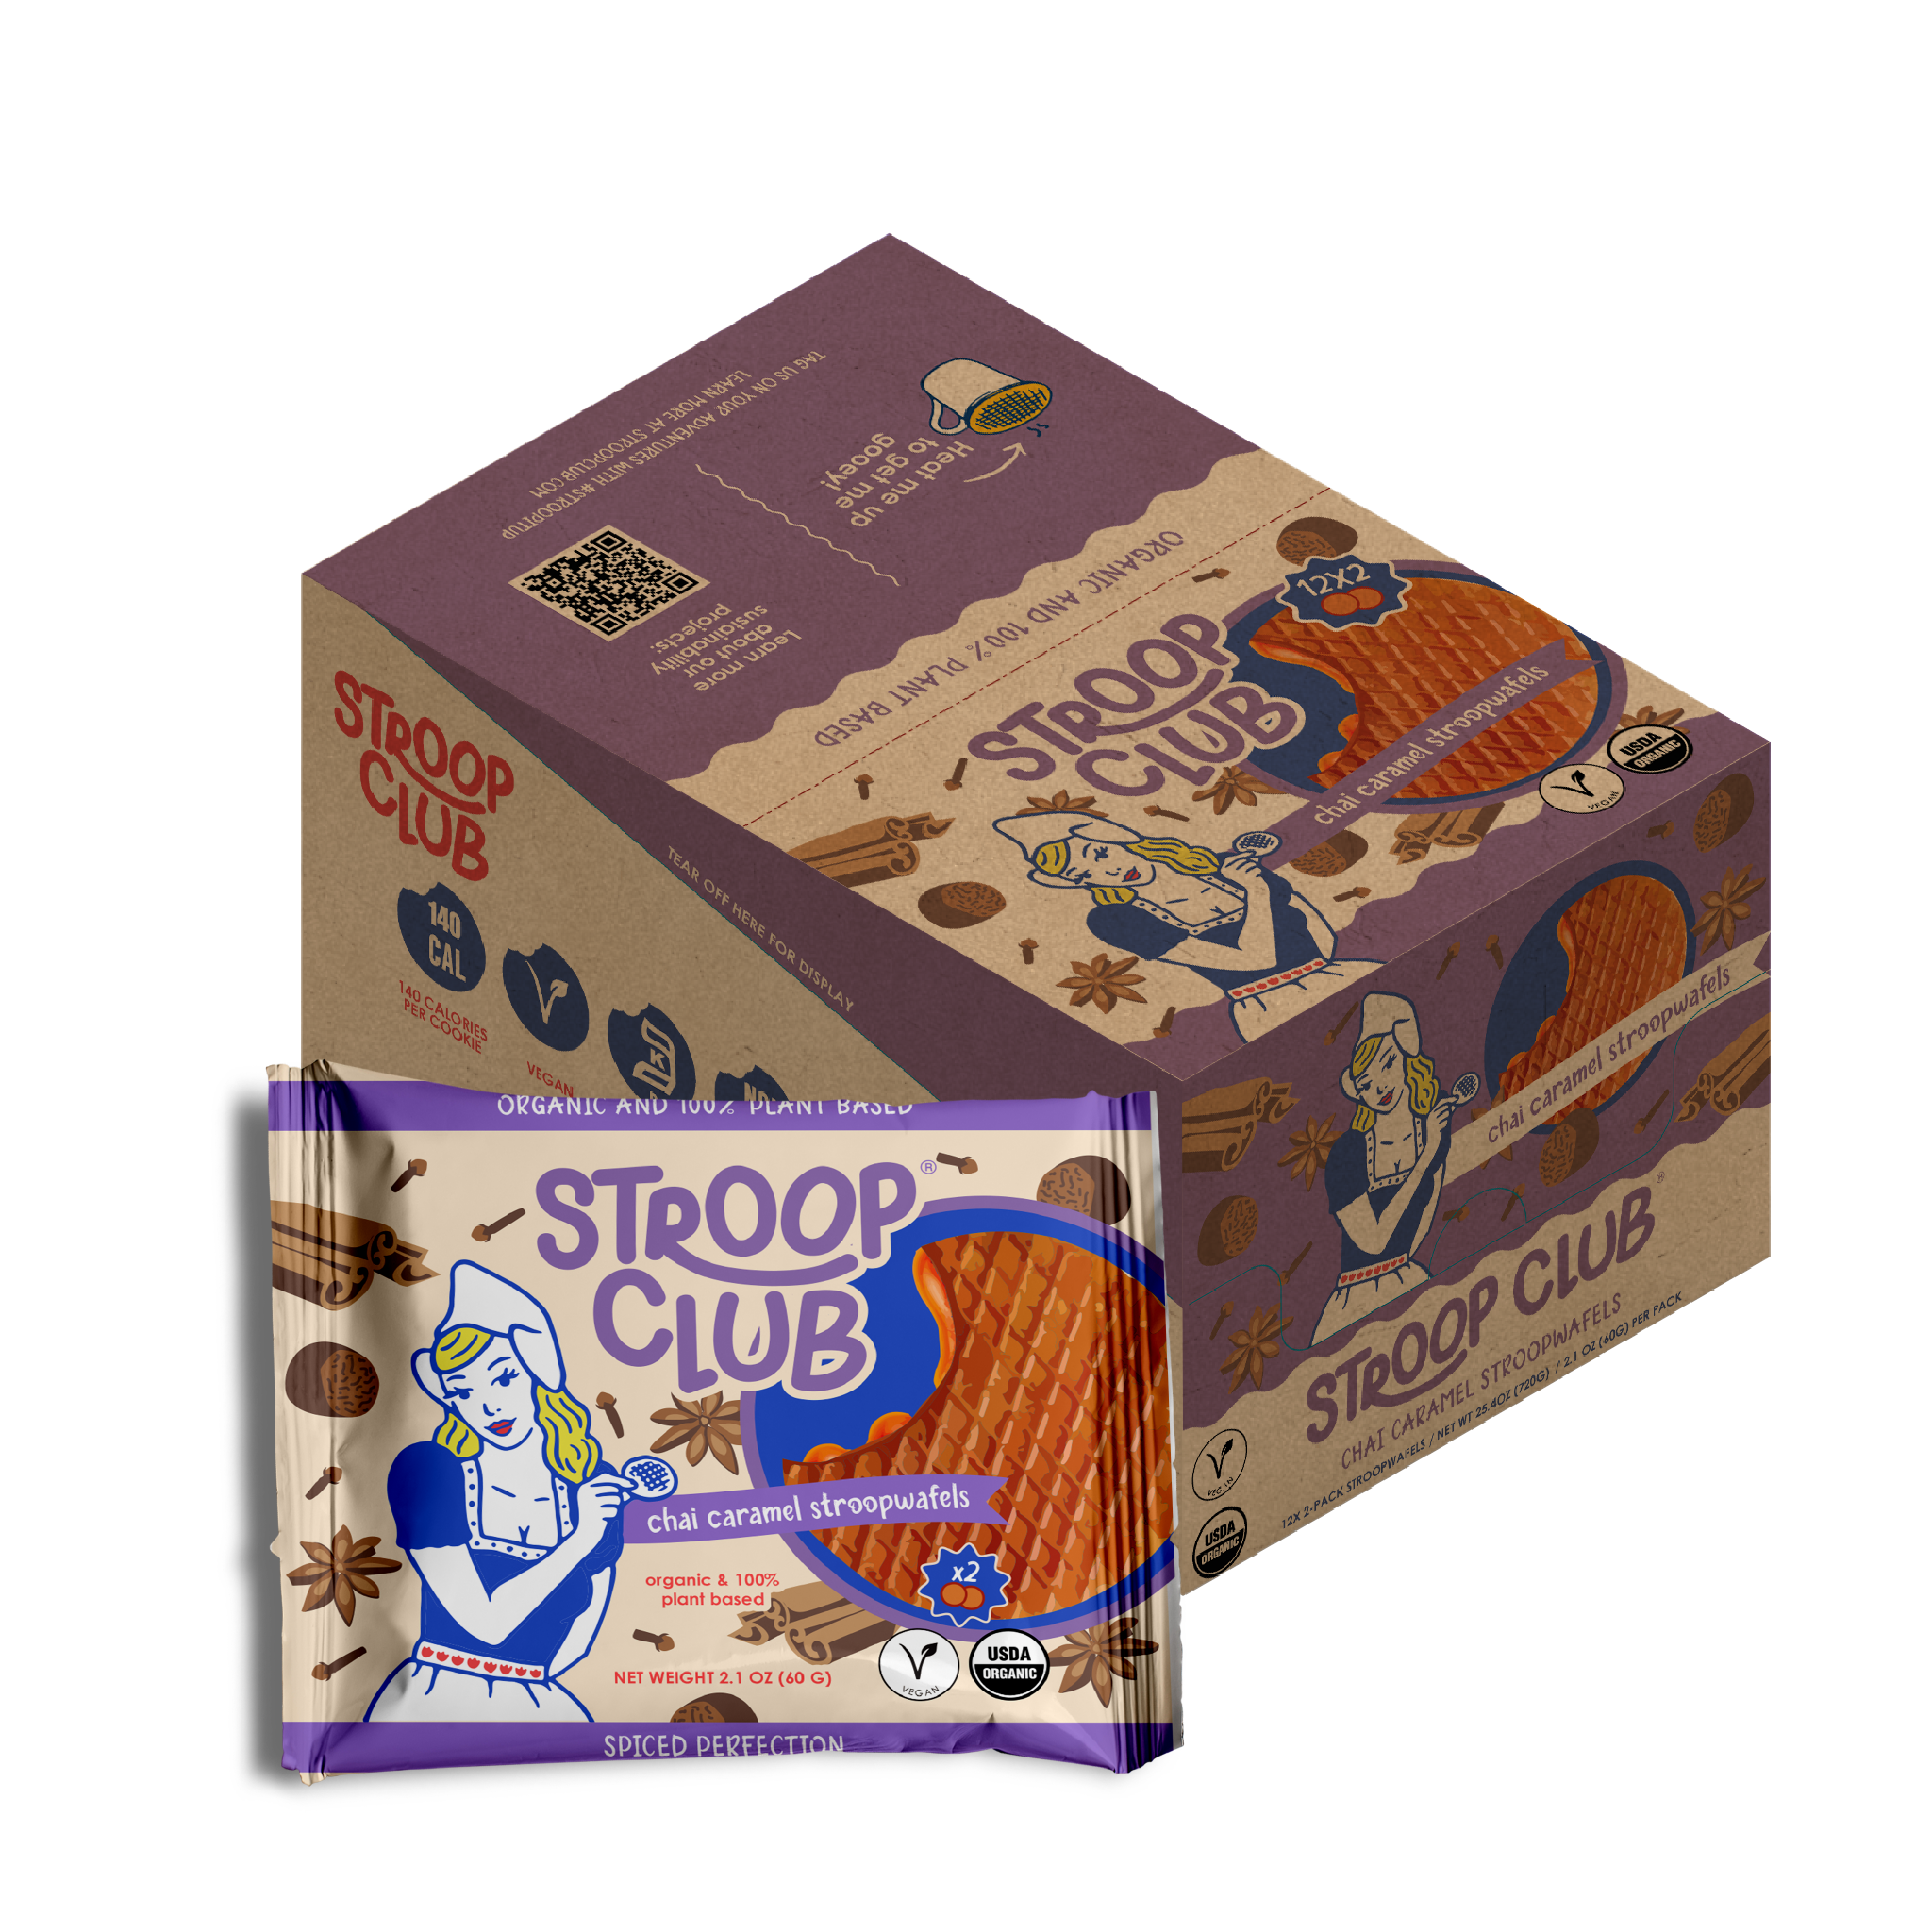 Chai Caramel Plant Based and Organic Stroopwafels (box of 12x 2-pack - 24 total)